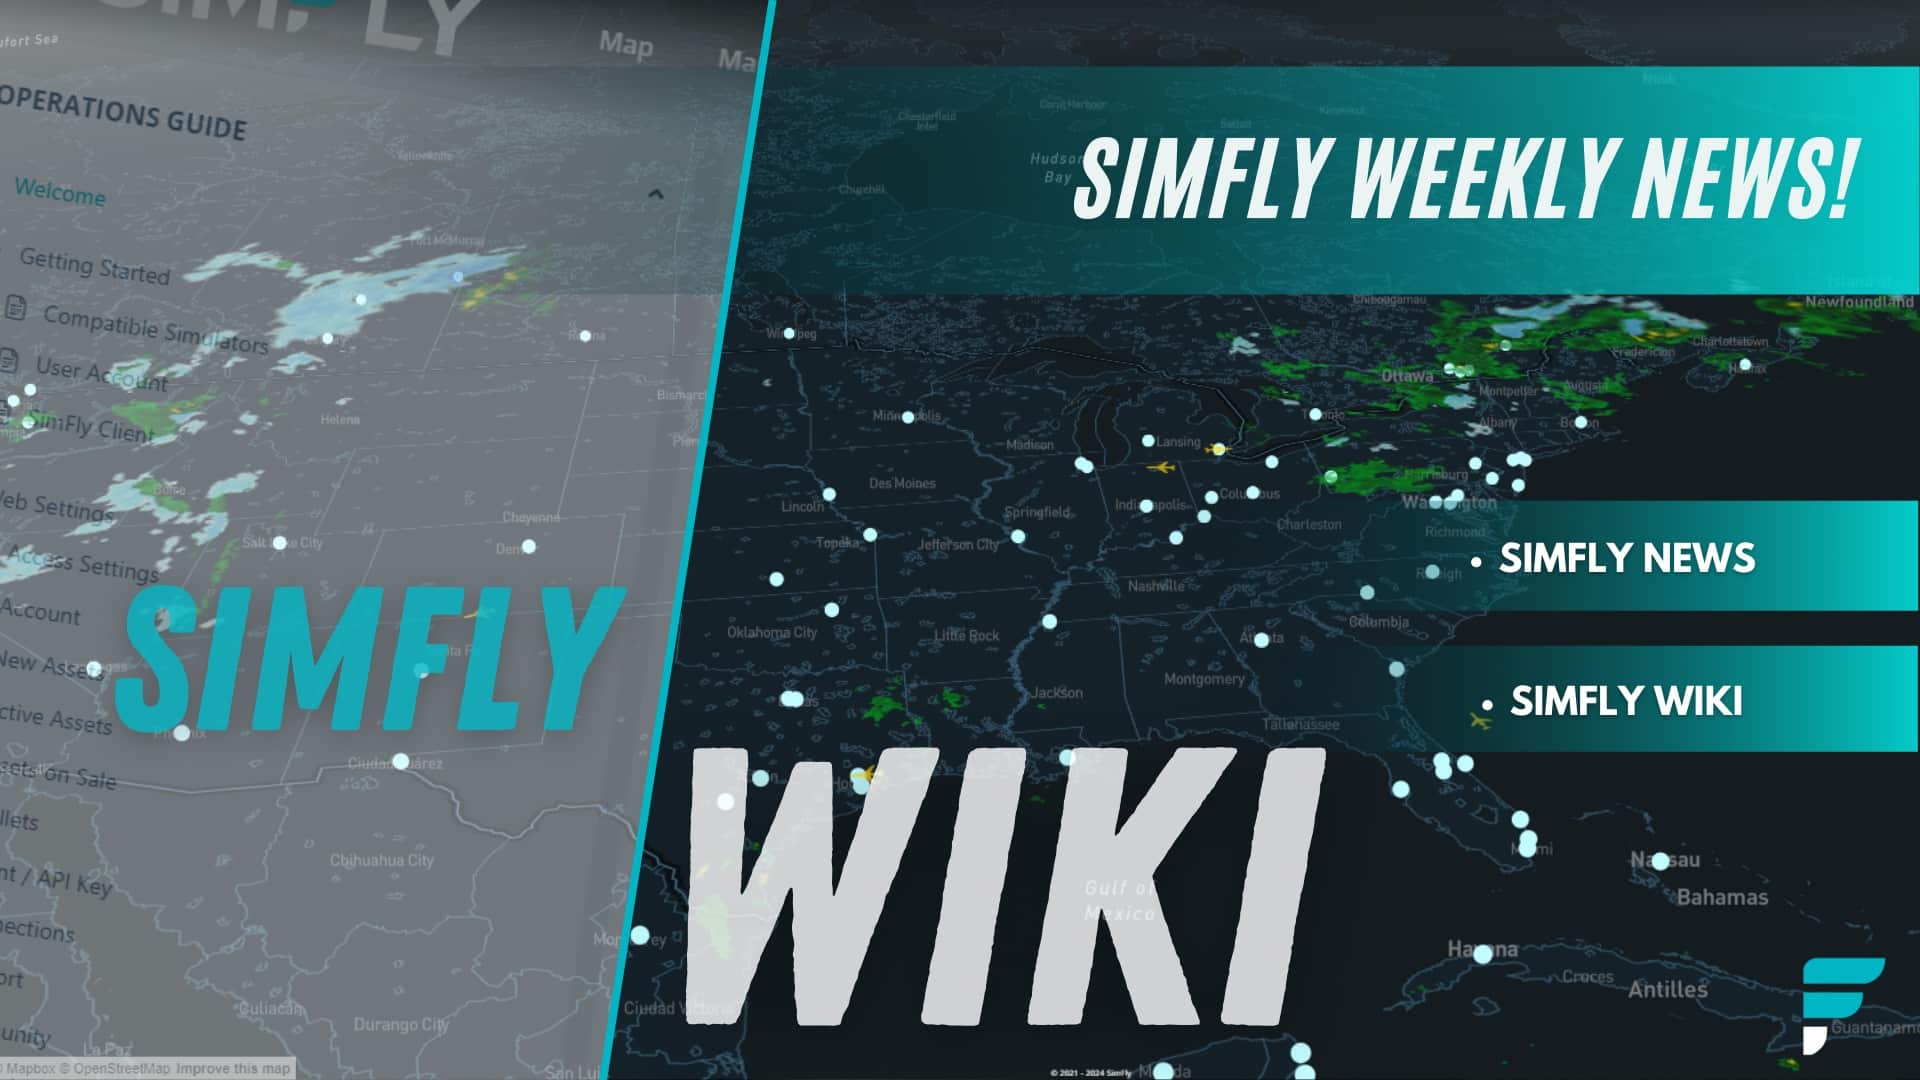 SimFly Wiki Now Available!